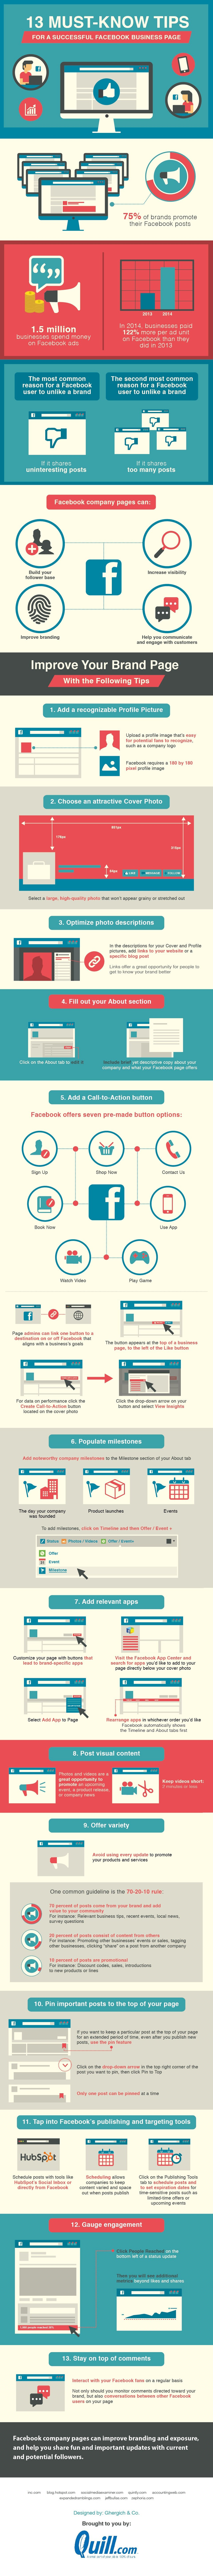 facebook-business-page-tips-infographic.jpg